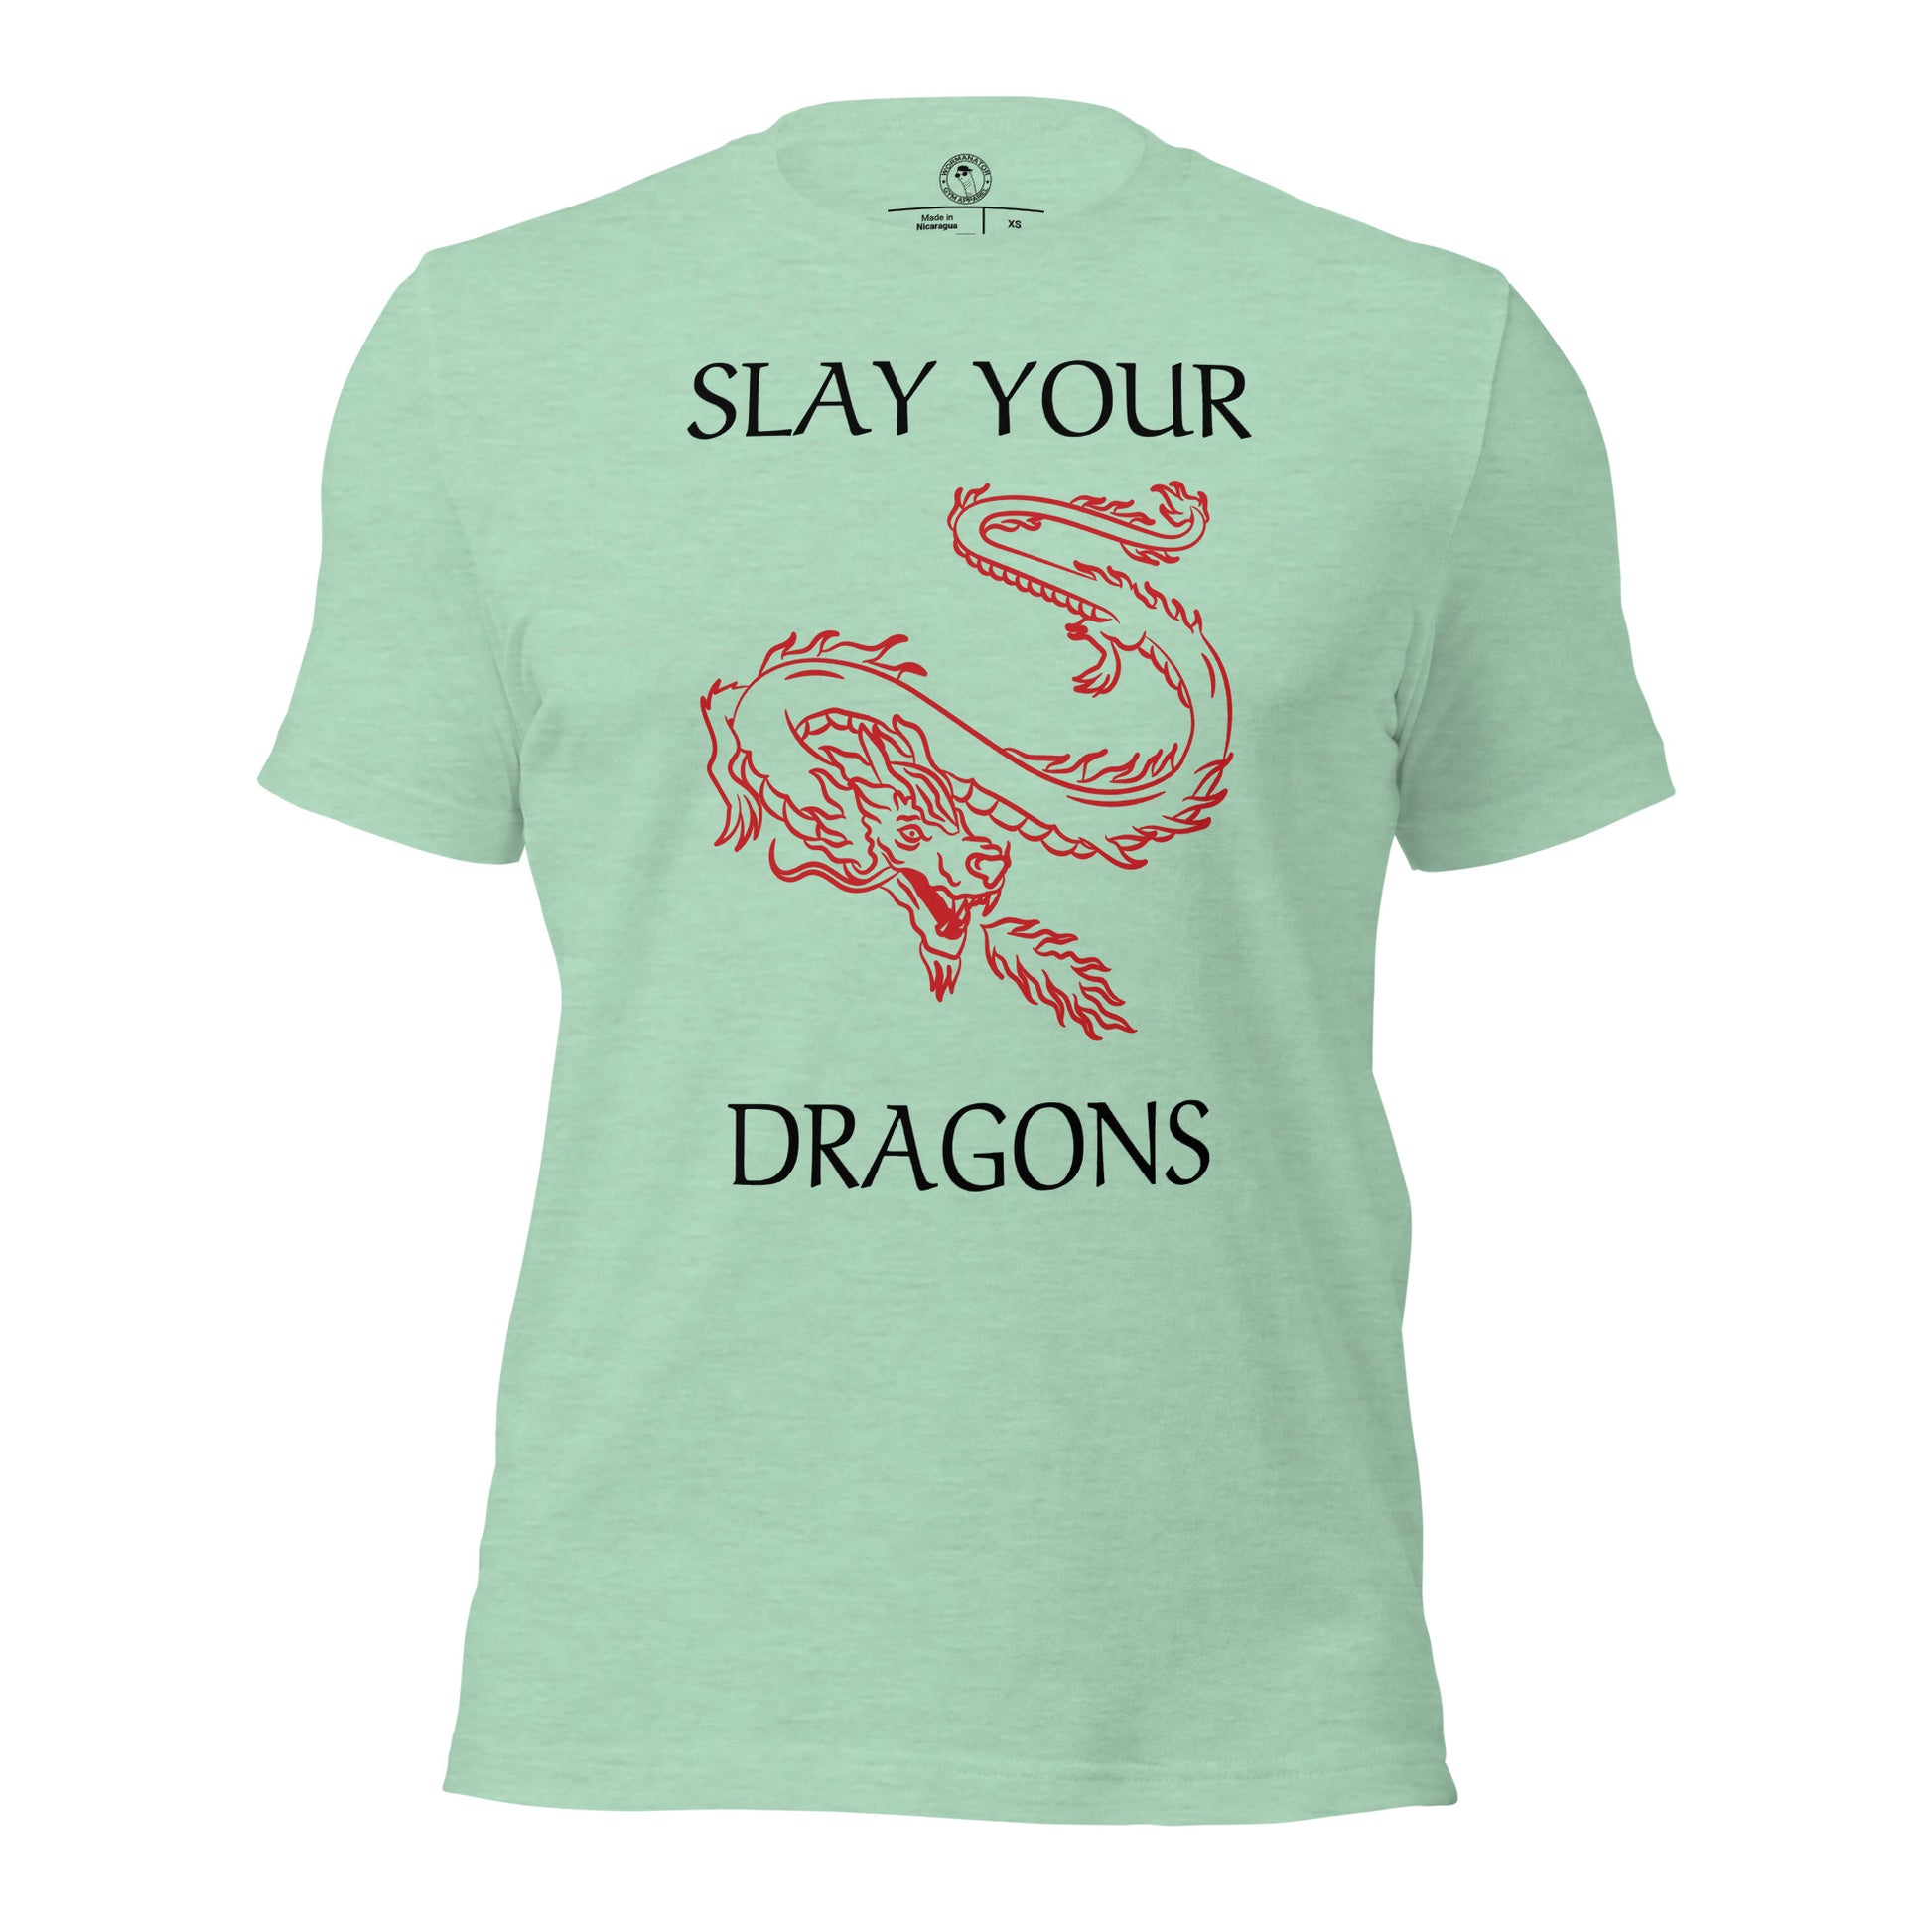 Slay Your Dragons Shirt in Heather Prism Mint